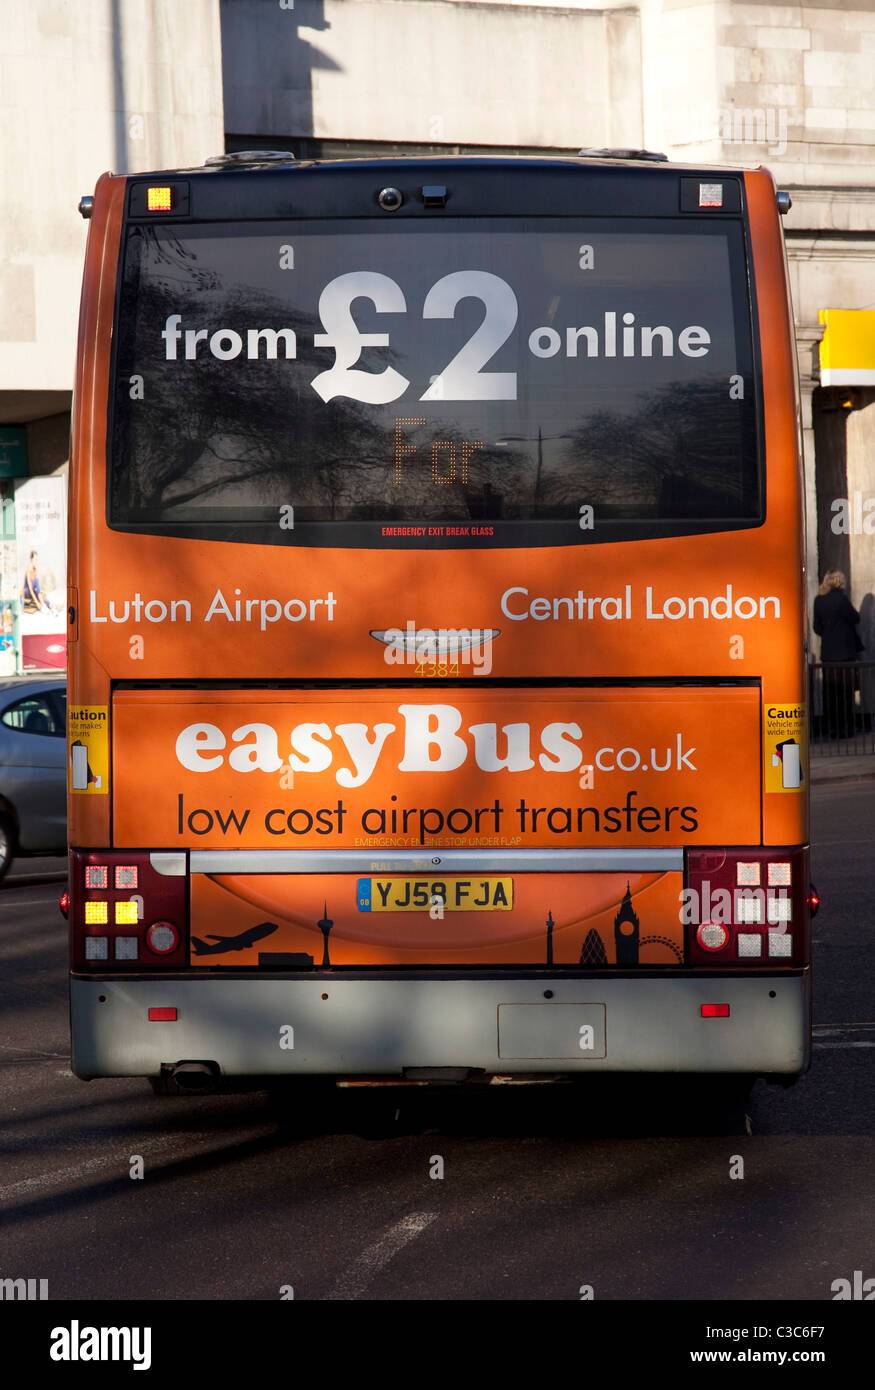 Rear of an Easyjet Easybus bus, used for cheap transfer to flights for the low cost airline. Stock Photo